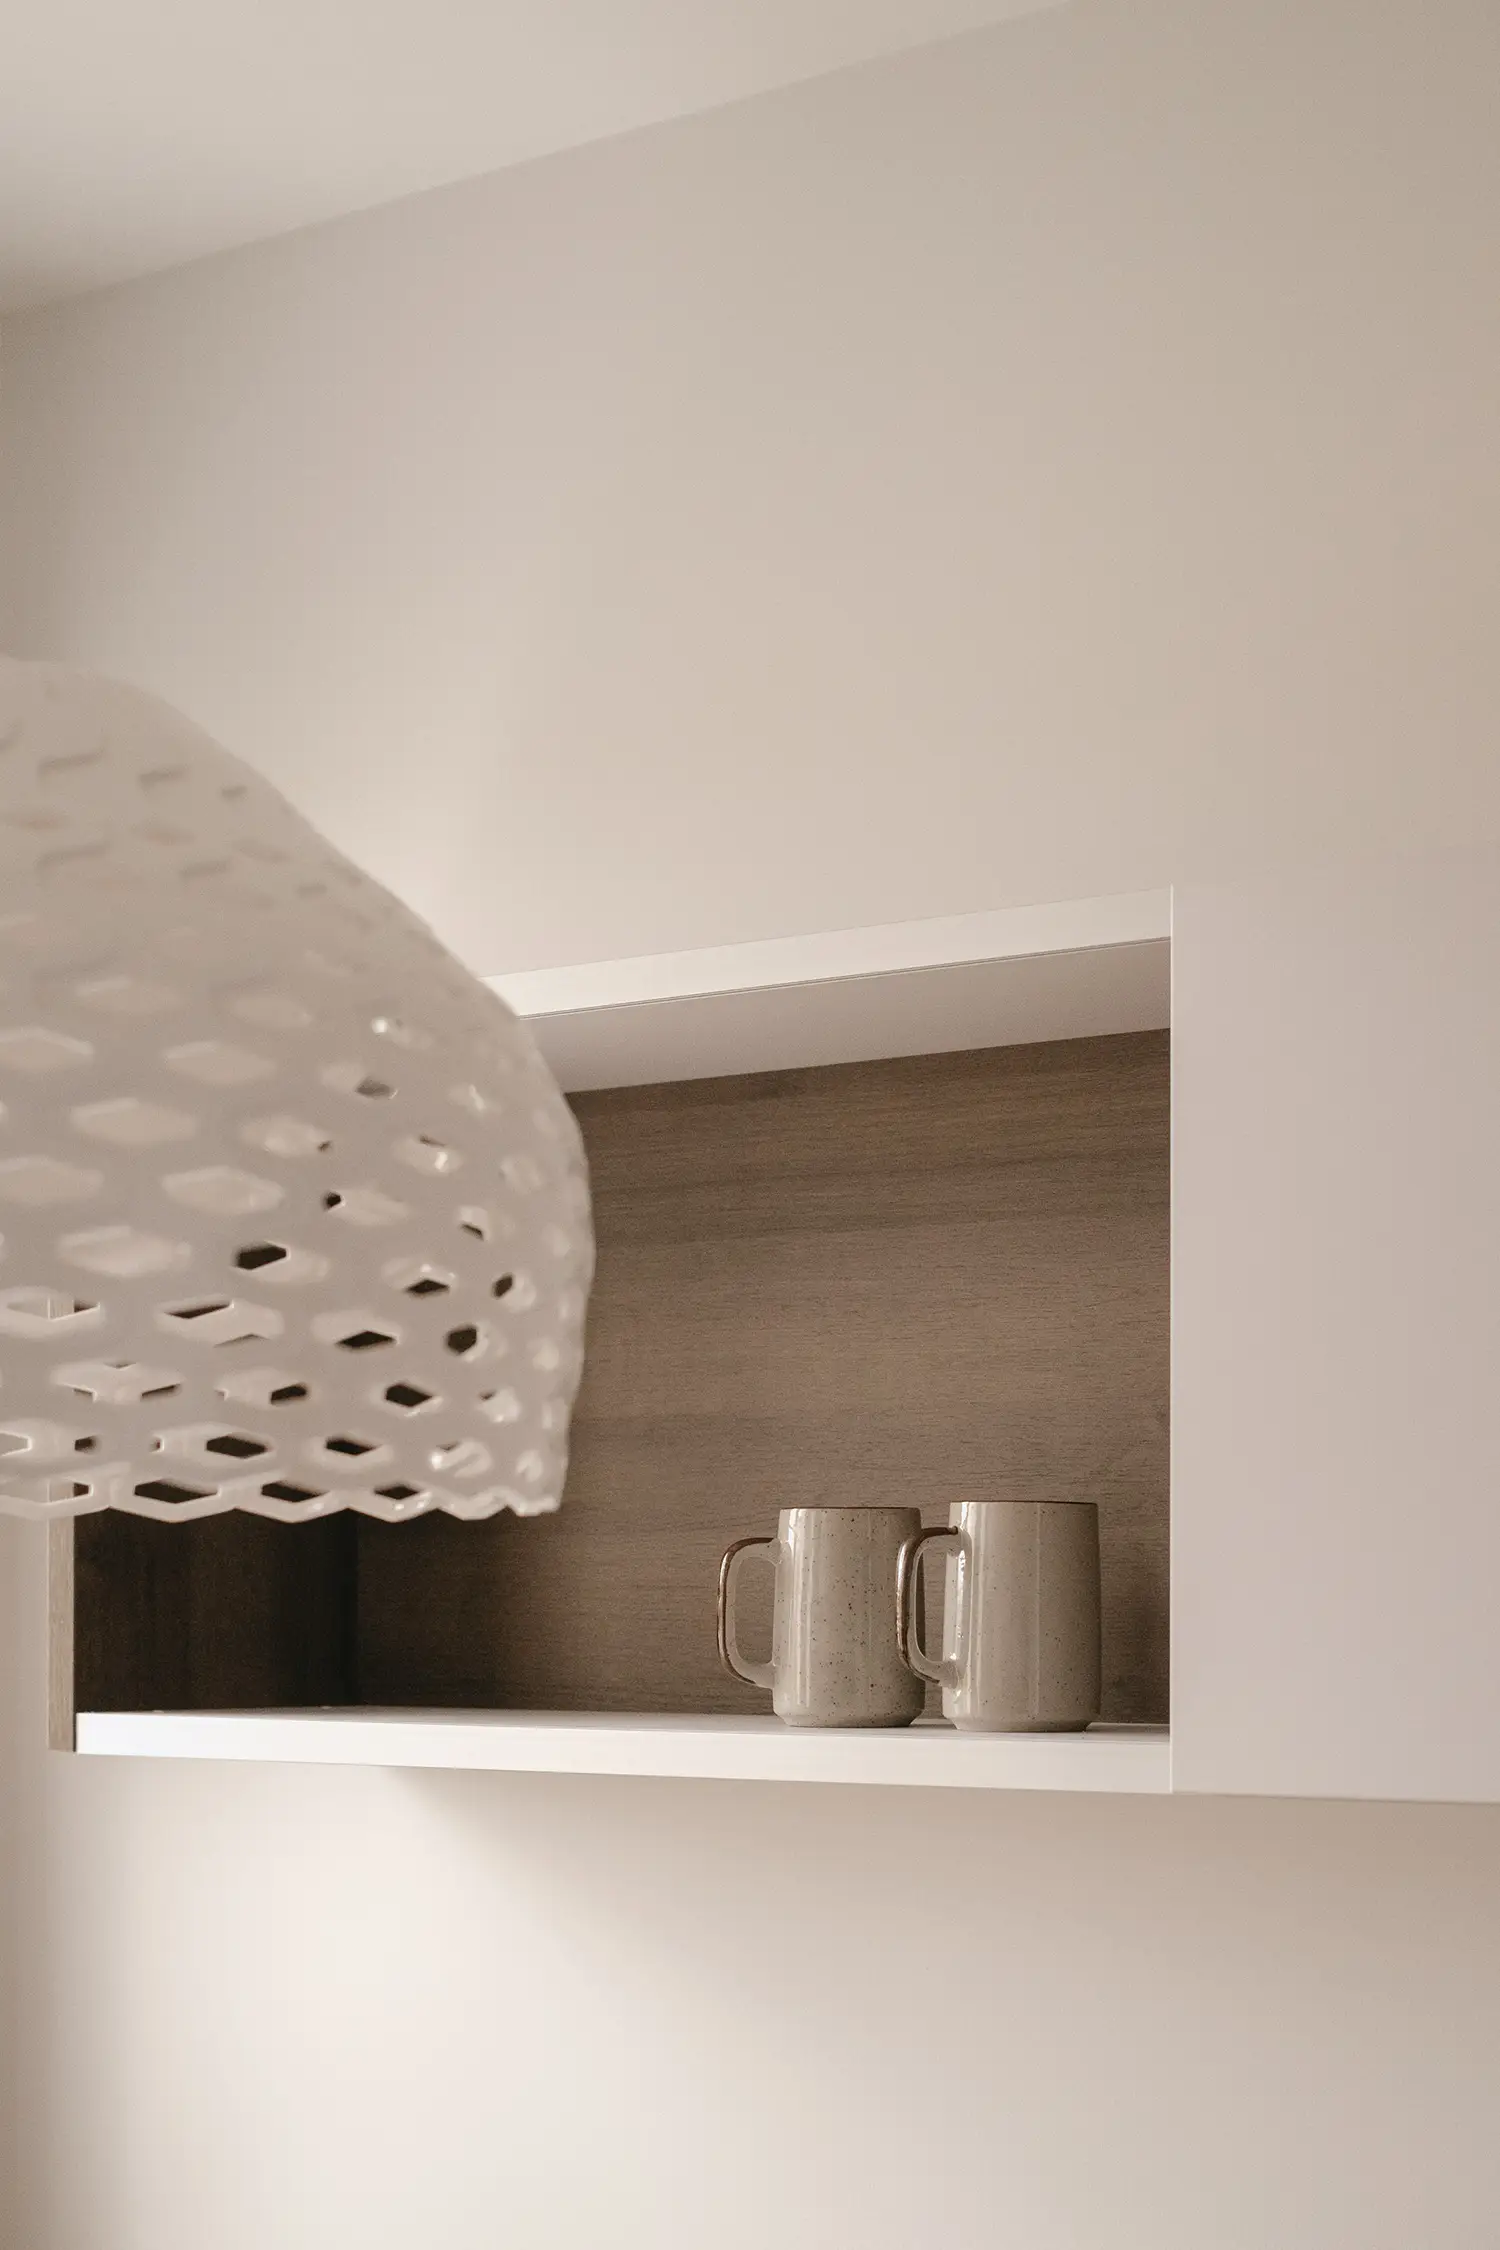 Detail photo of a Flos ceiling light and a white wooden pantry; renovation project by Elles Interior Design.